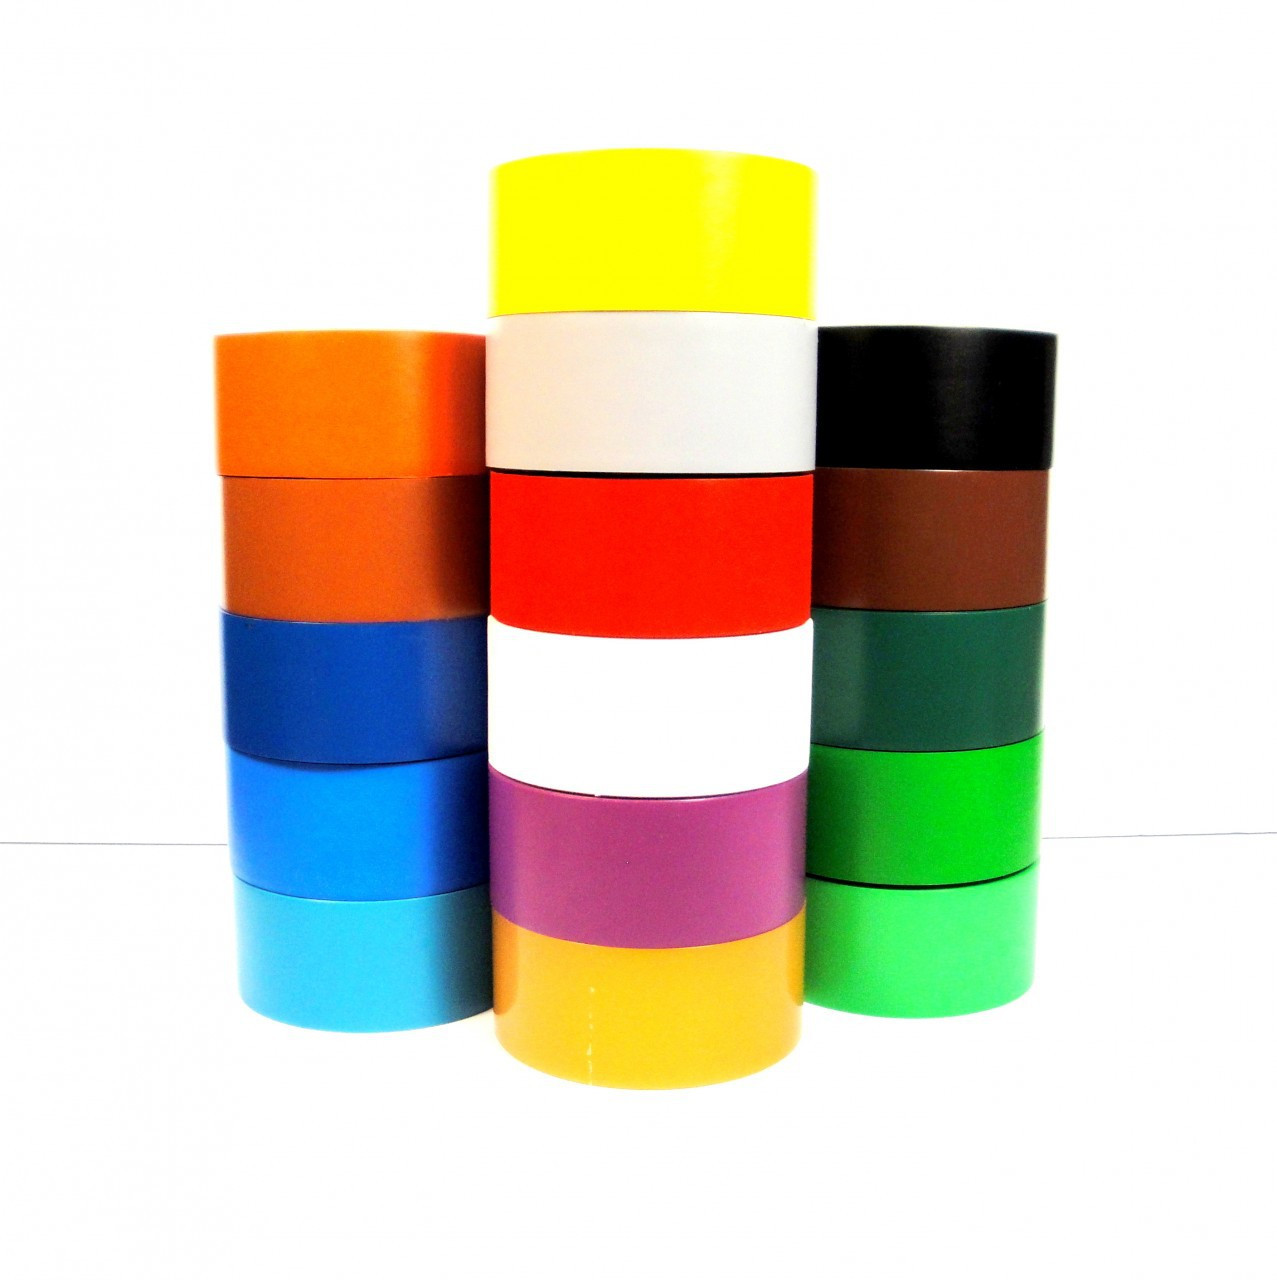 6 Rolls Colored Painters Tape Labelling or Coding Rolls for Home